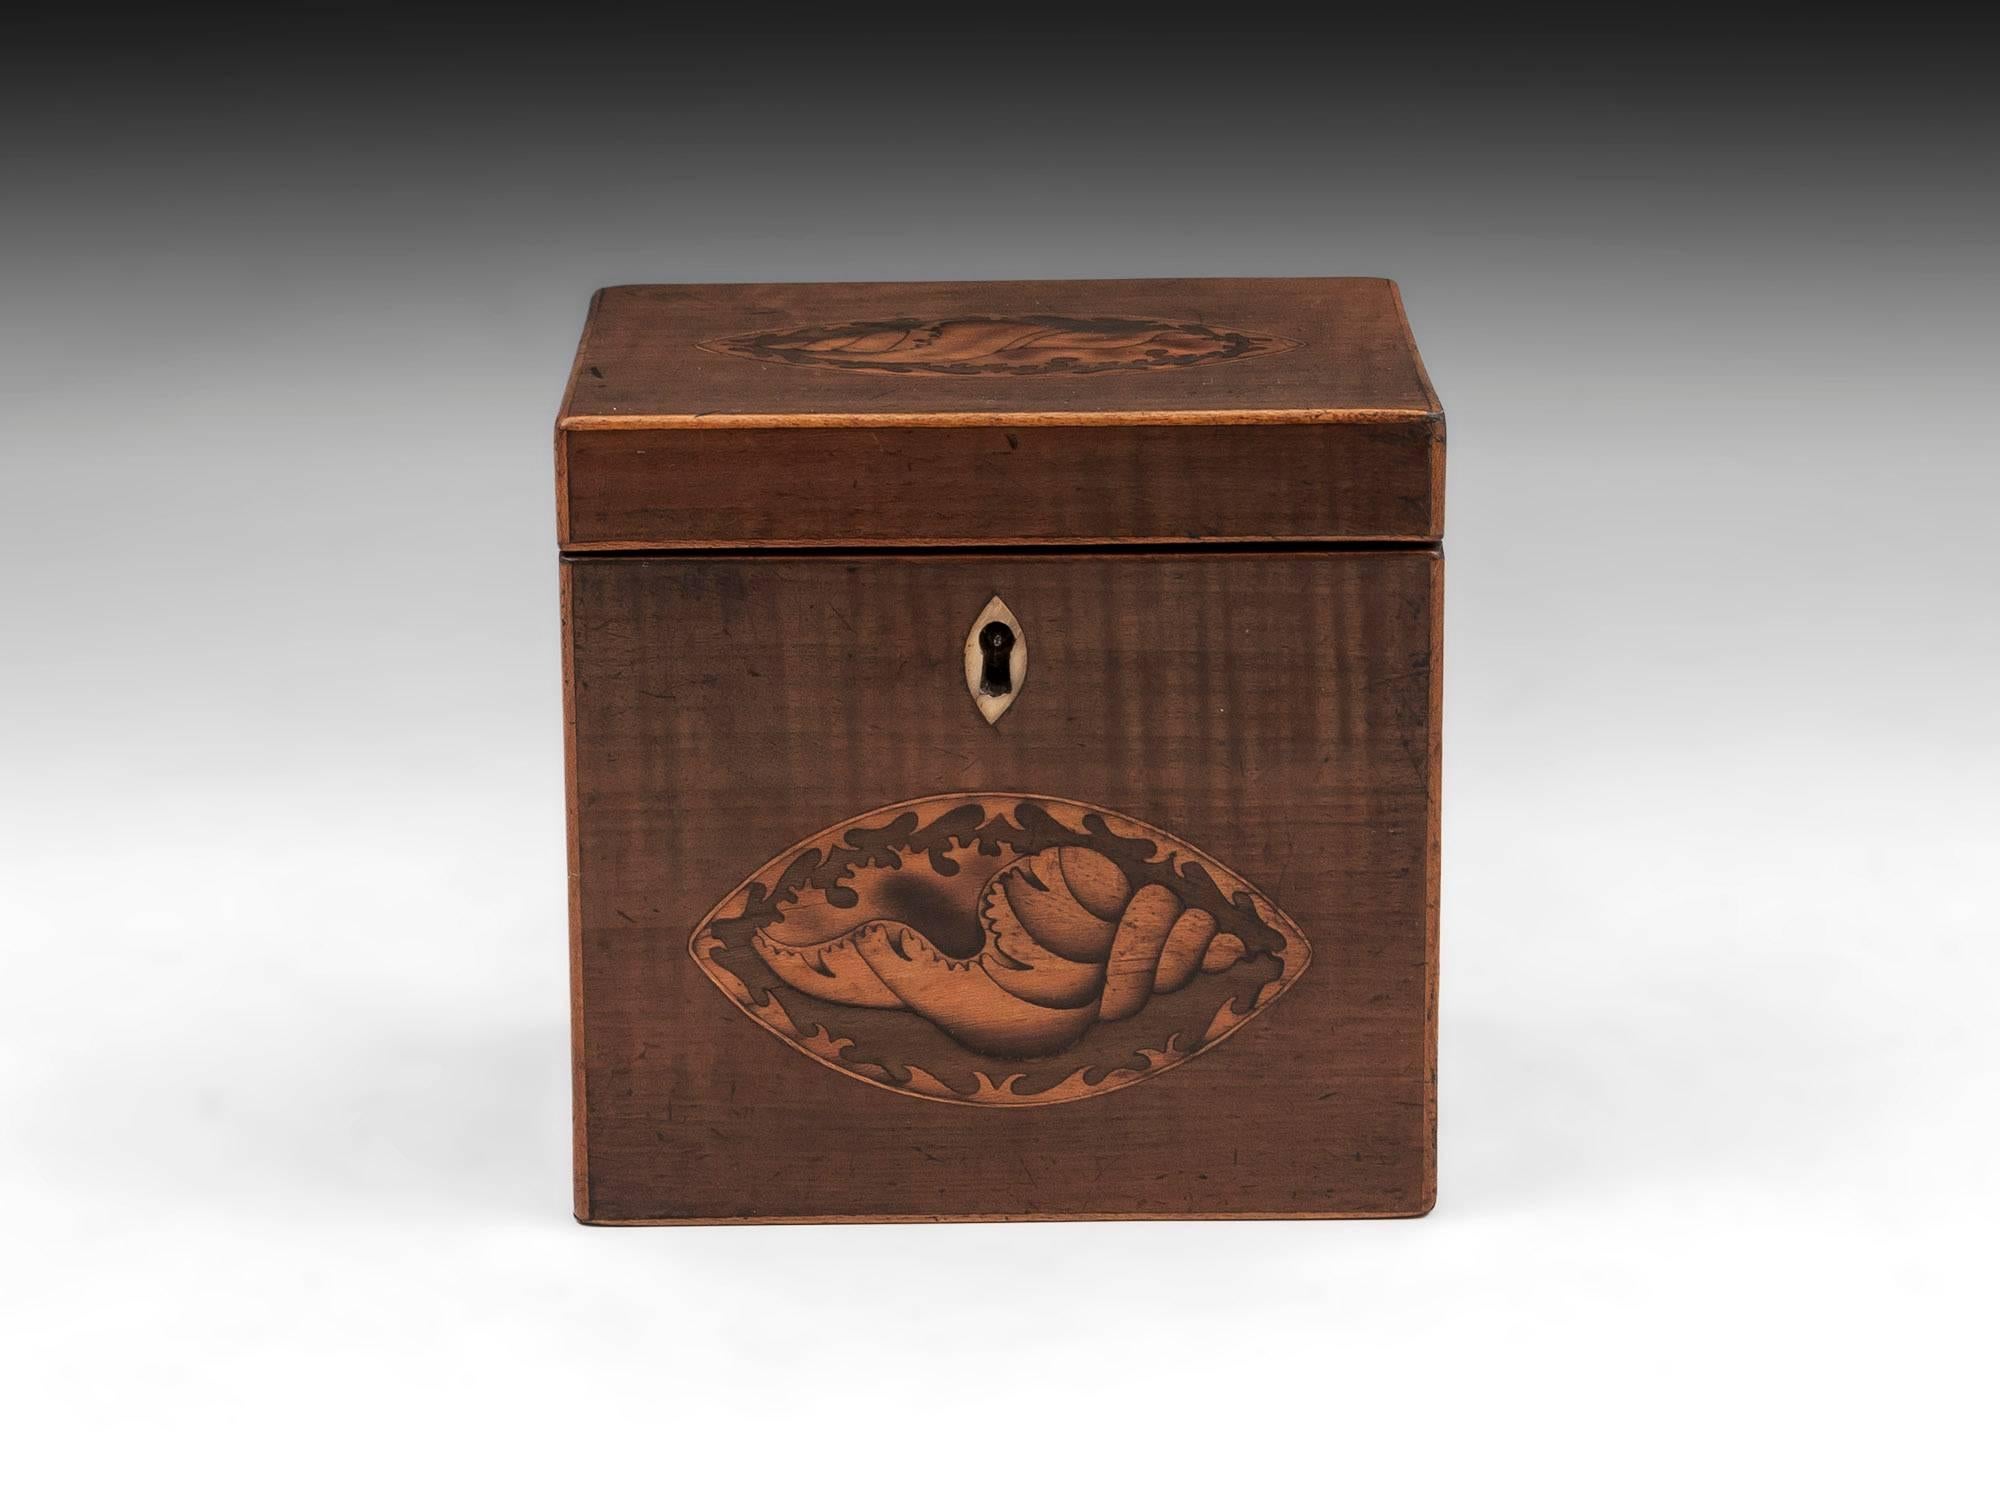 Antique Harewood tea caddy with inlaid conch shells on the front and top and bone escutcheon. 

The Georgian single tea caddy interior features a floating lid with bone handle, which would of sat on top of the loose tea to keep it fresh.